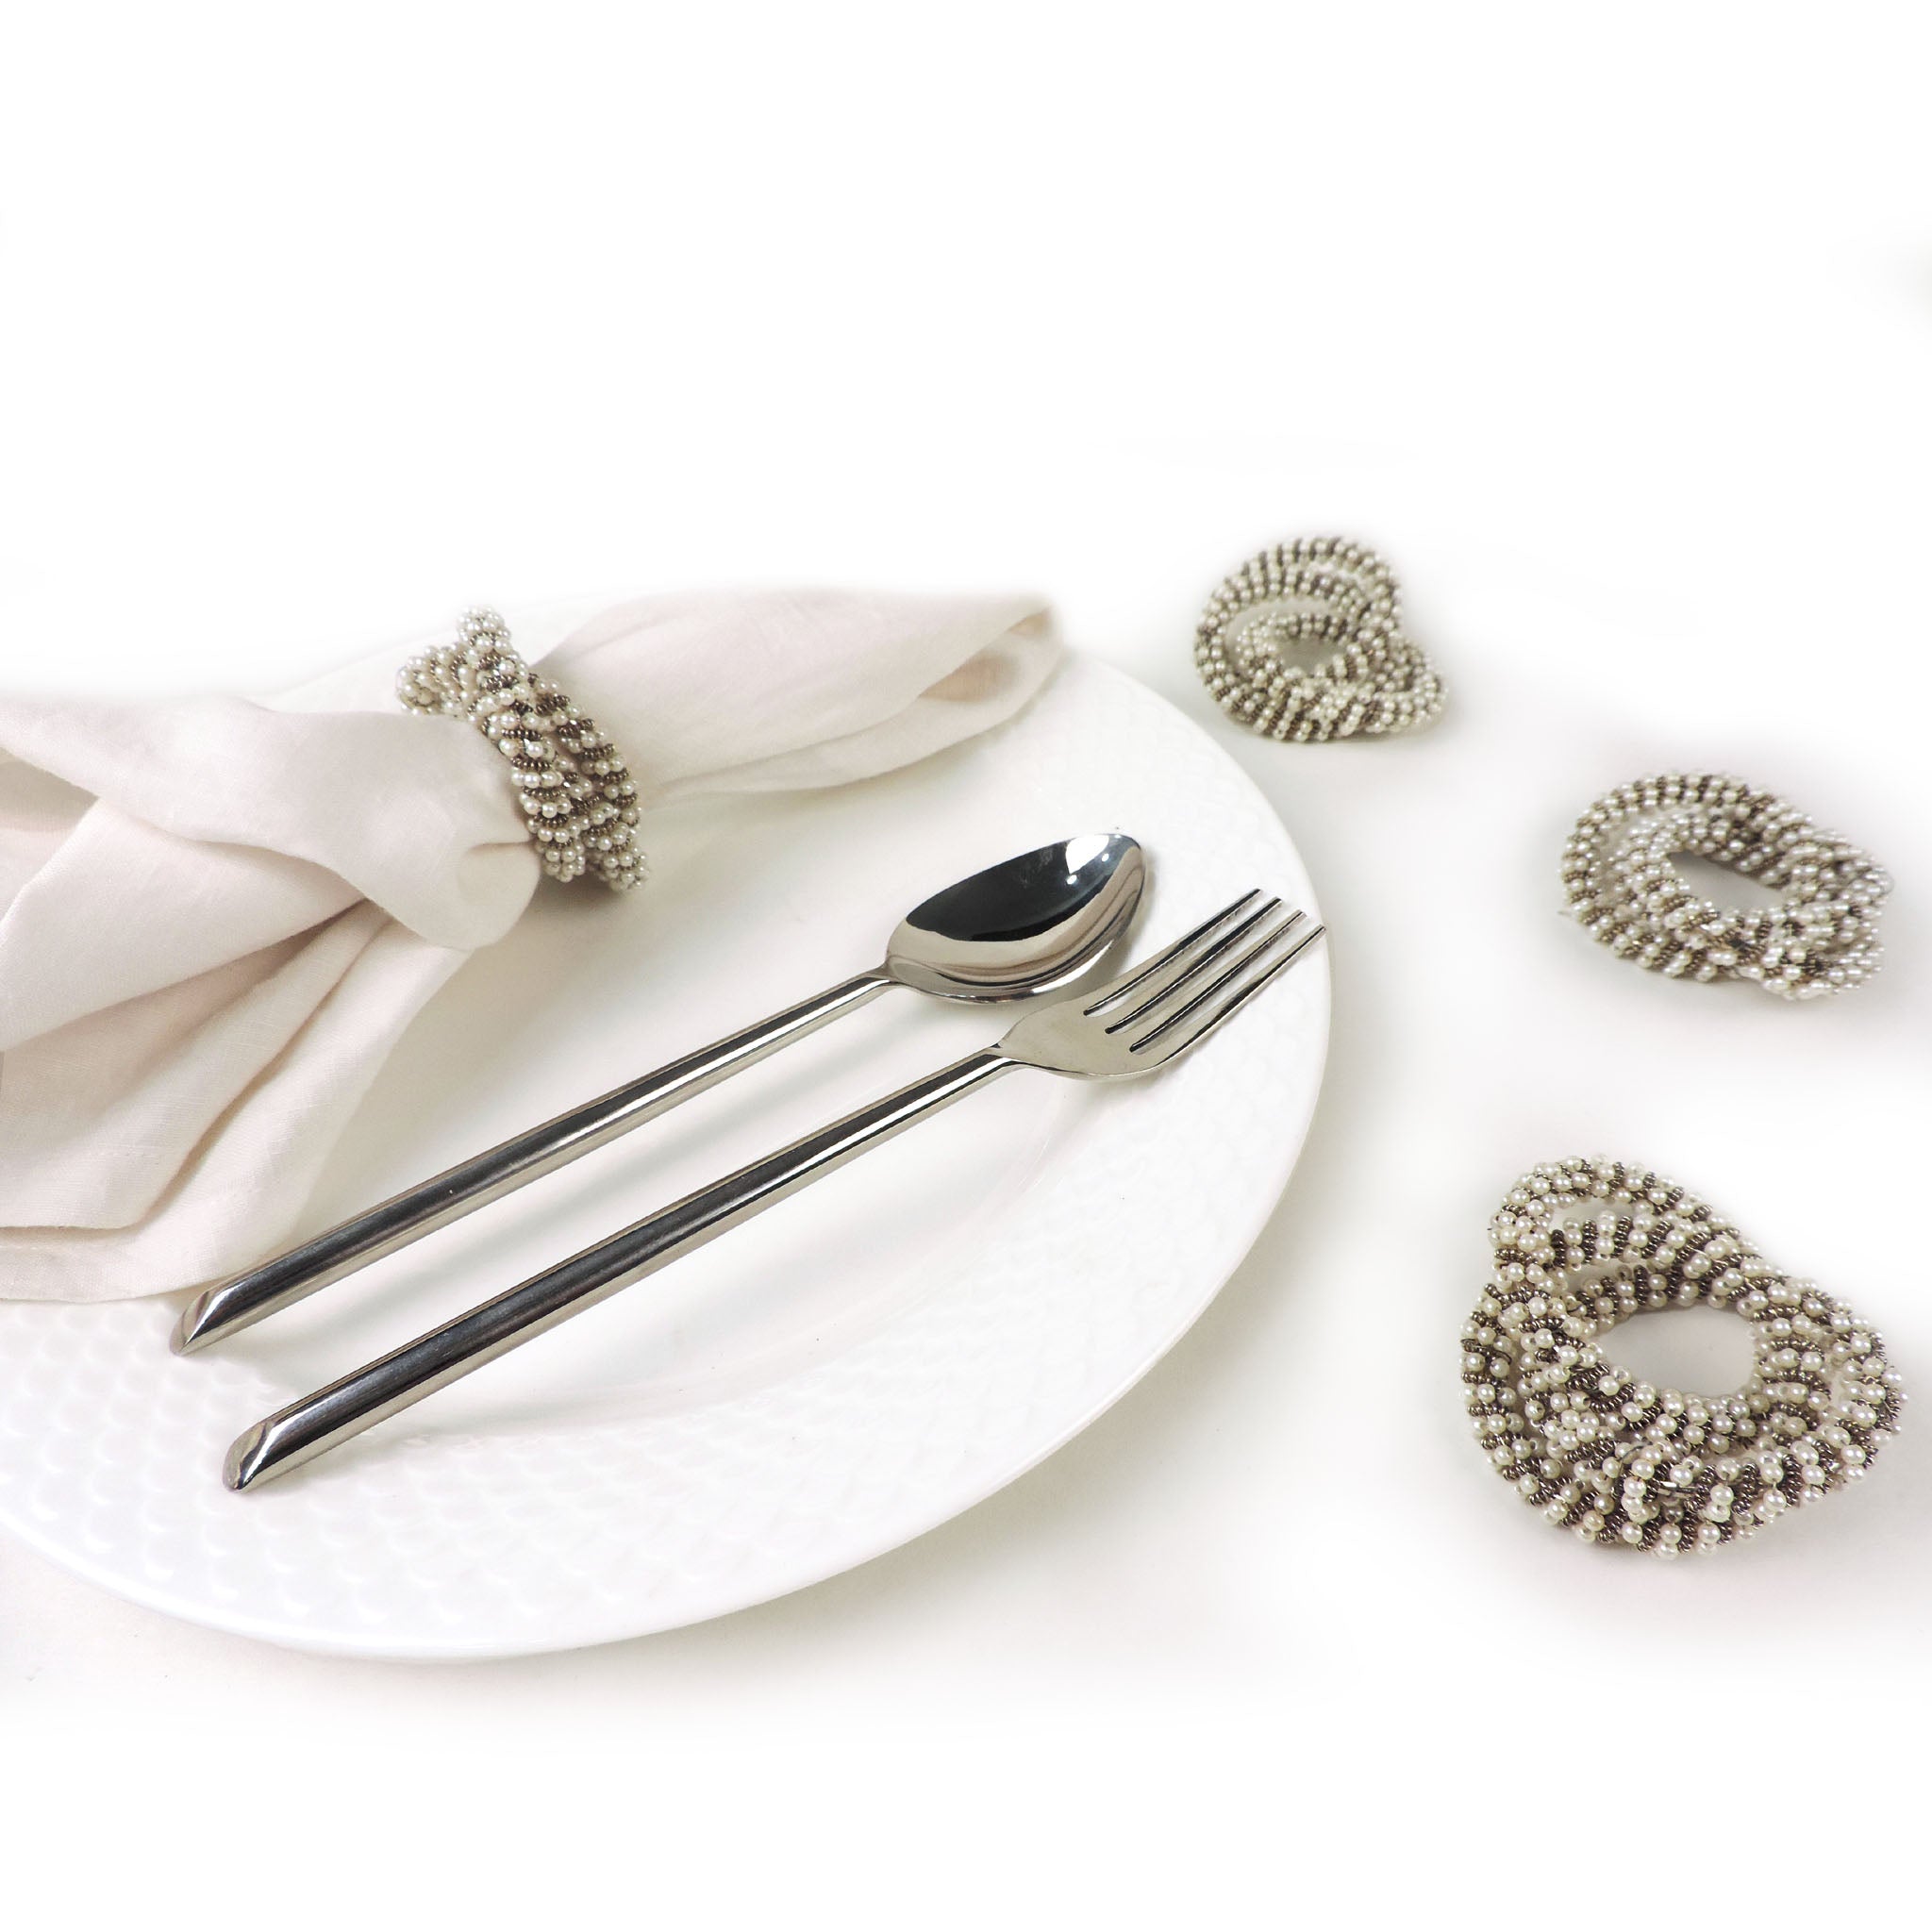 Roped Pearl Napkin Ring in White & Silver, Set of 4